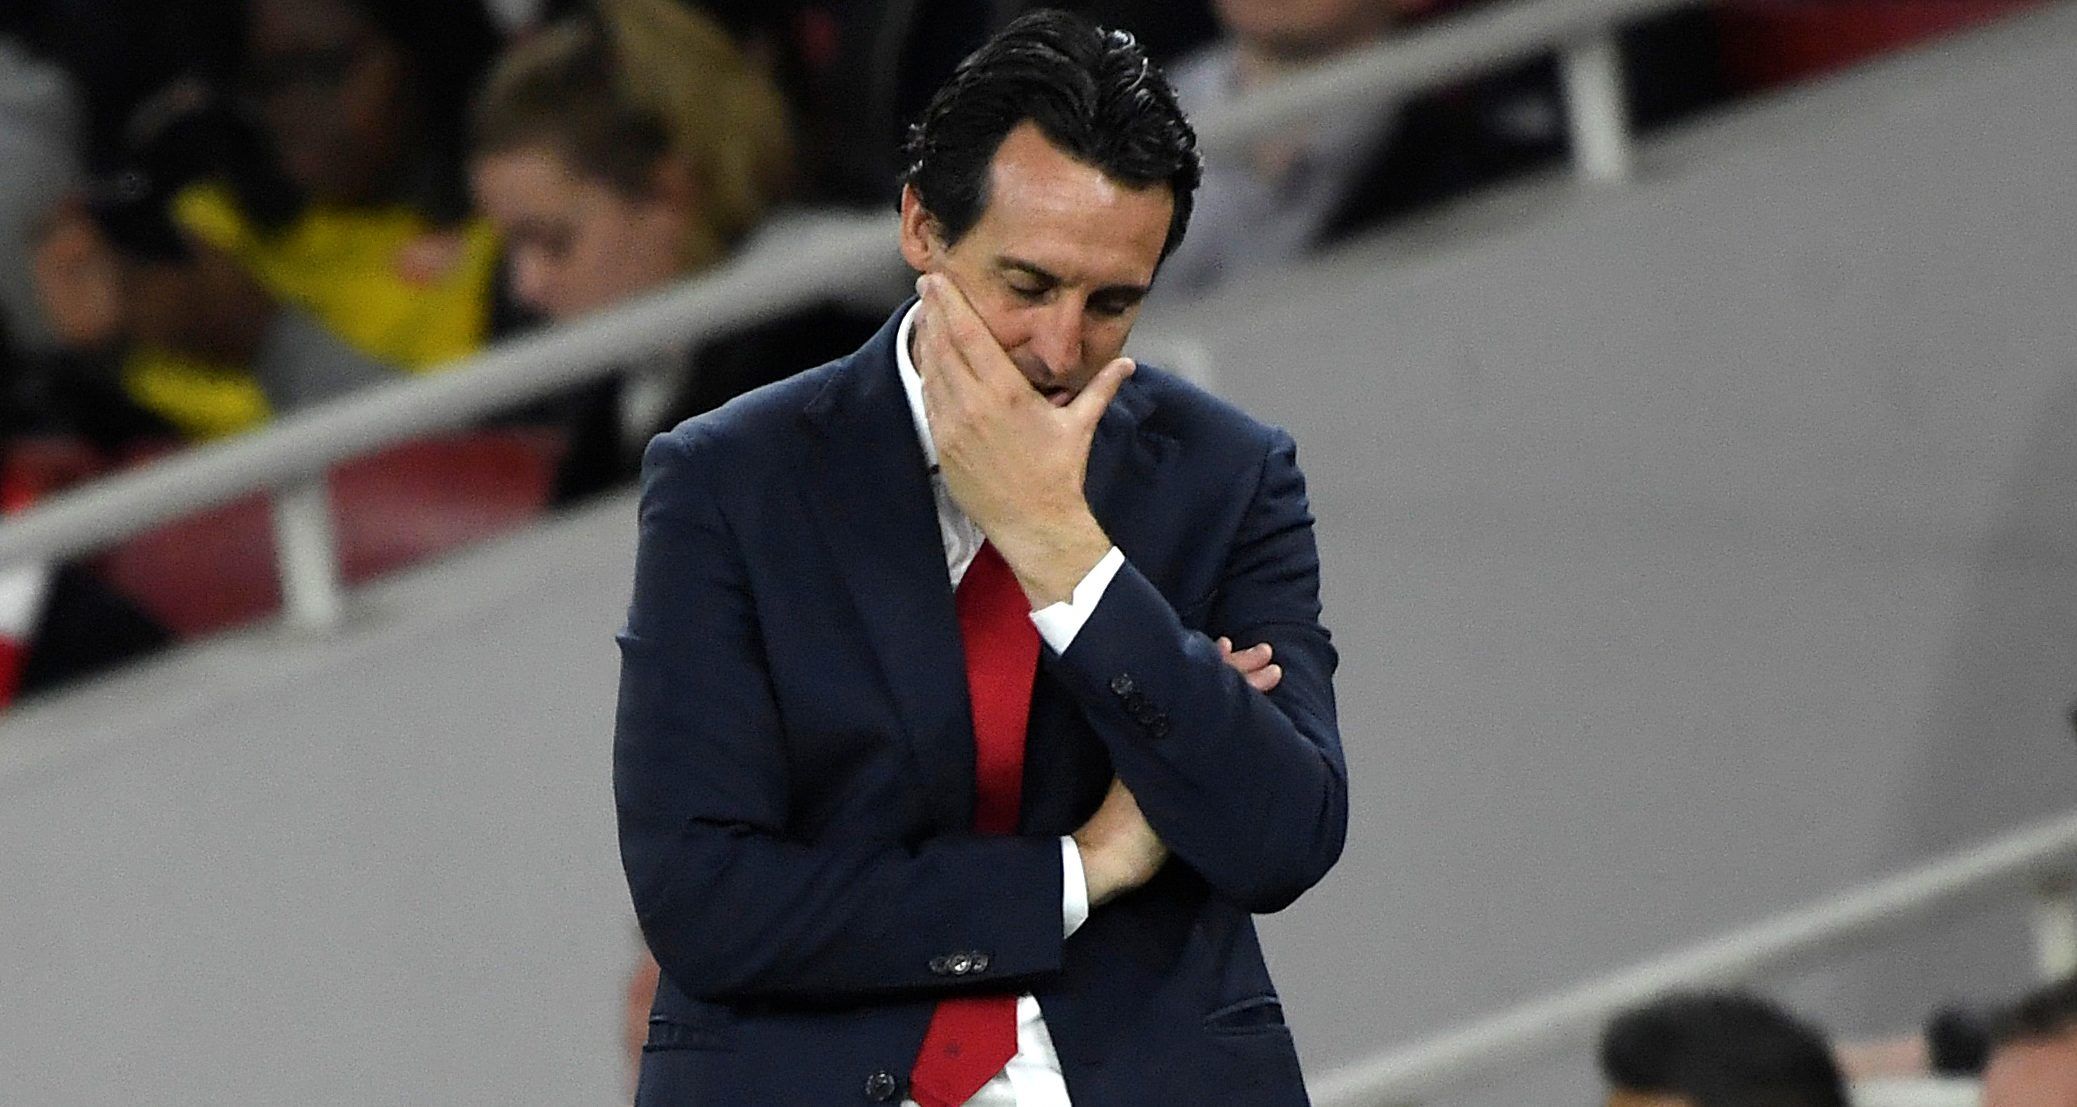 Soccer Football - Carabao Cup - Third Round - Arsenal v Nottingham Forest - Emirates Stadium, London, Britain - September 24, 2019  Arsenal manager Unai Emery reacts               Action Images via Reuters/Tony O'Brien  EDITORIAL USE ONLY. No use with unauthorized audio, video, data, fixture lists, club/league logos or 